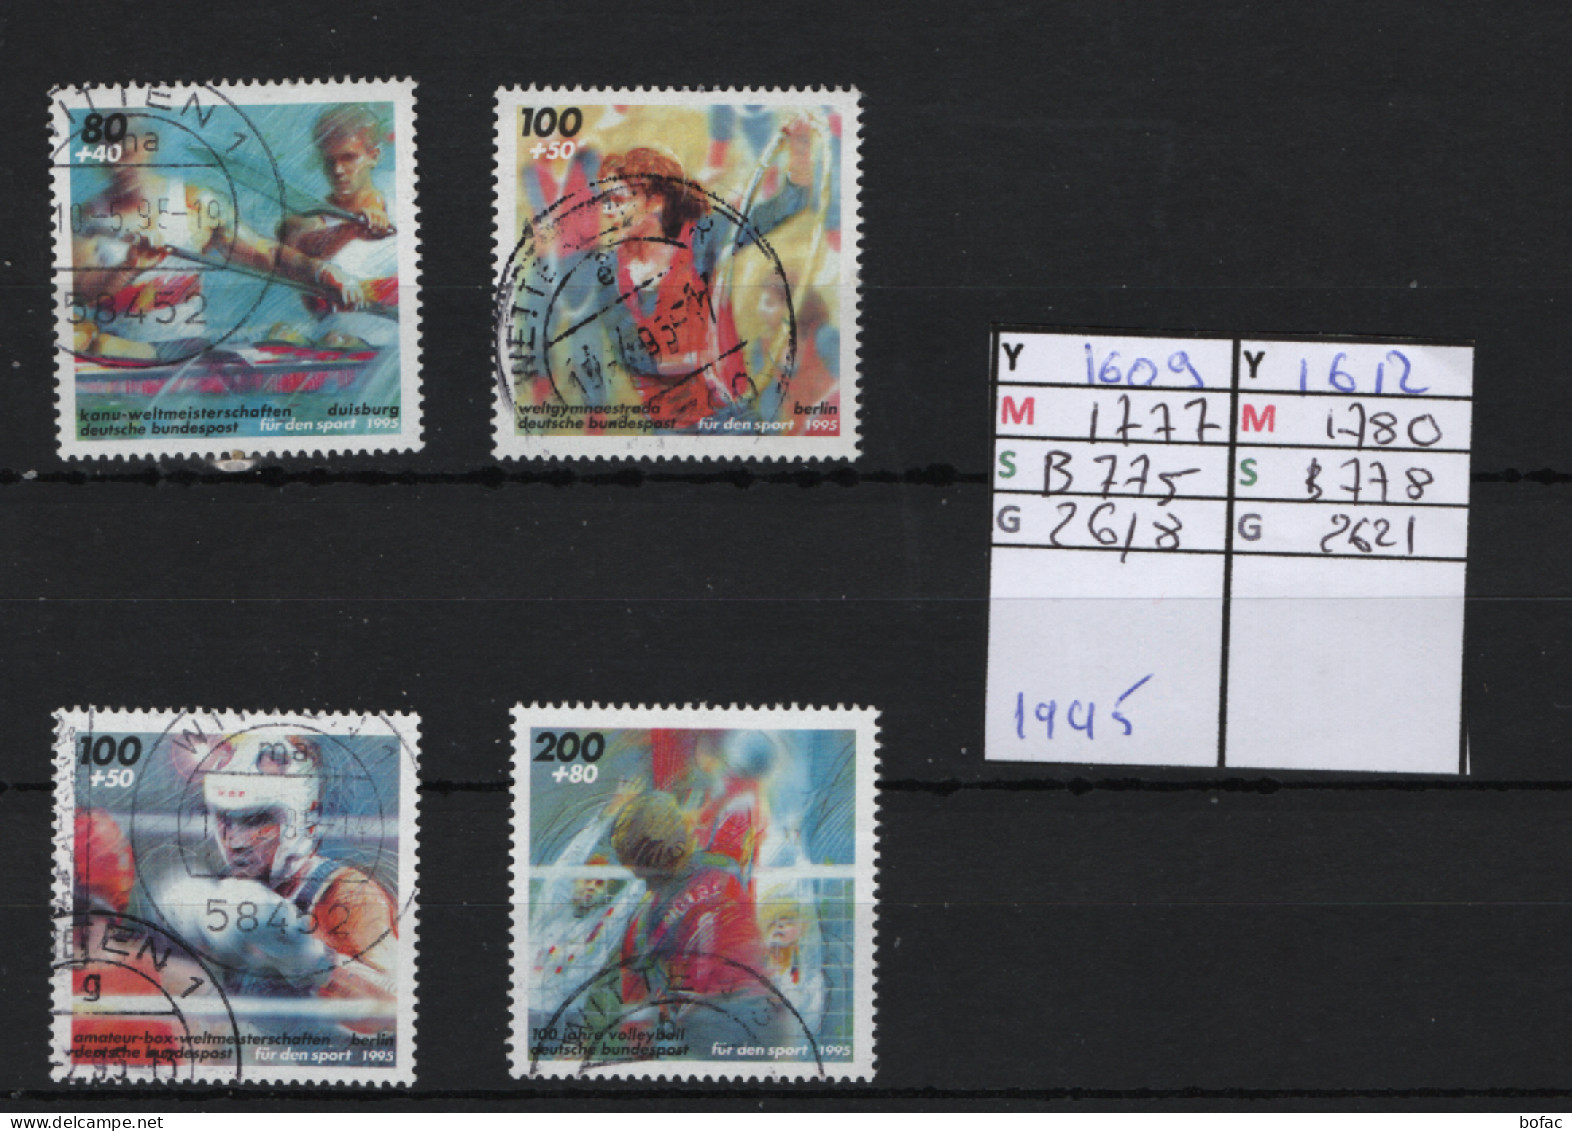 PRIX F. Obl  1609 A 1612 YT 1777 A 1780 MIC B775 A B780 SCO 2618 A 2621 GIB Evènements Sportifs 1995 75/12 - Used Stamps